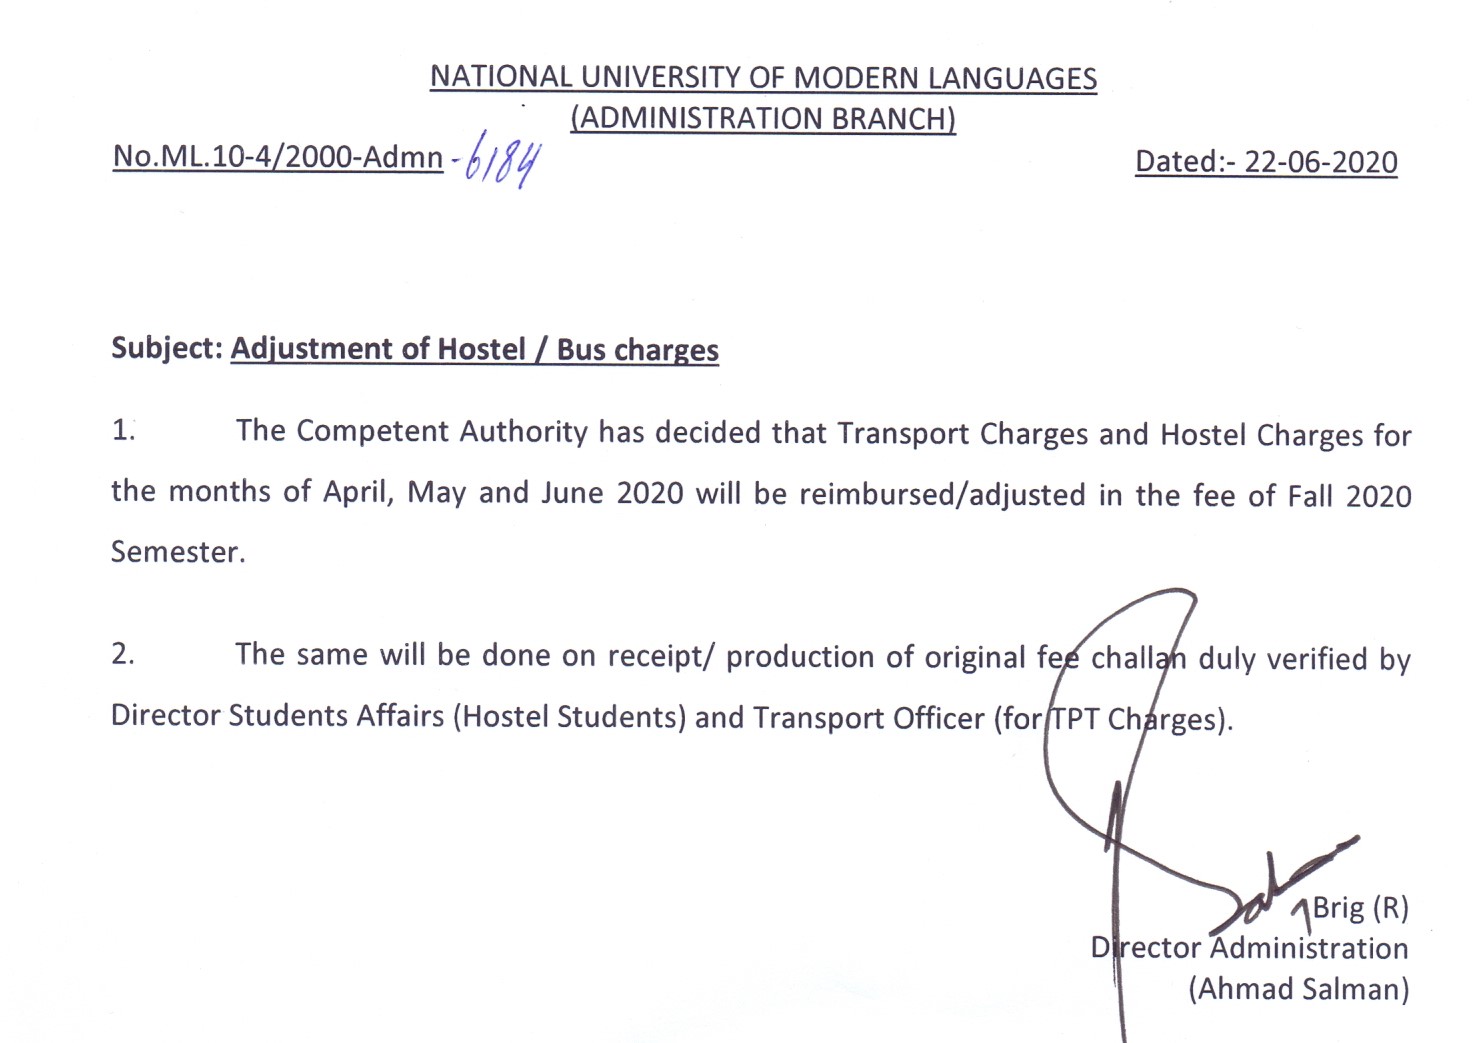 Adjustment of Hostel / Bus charges